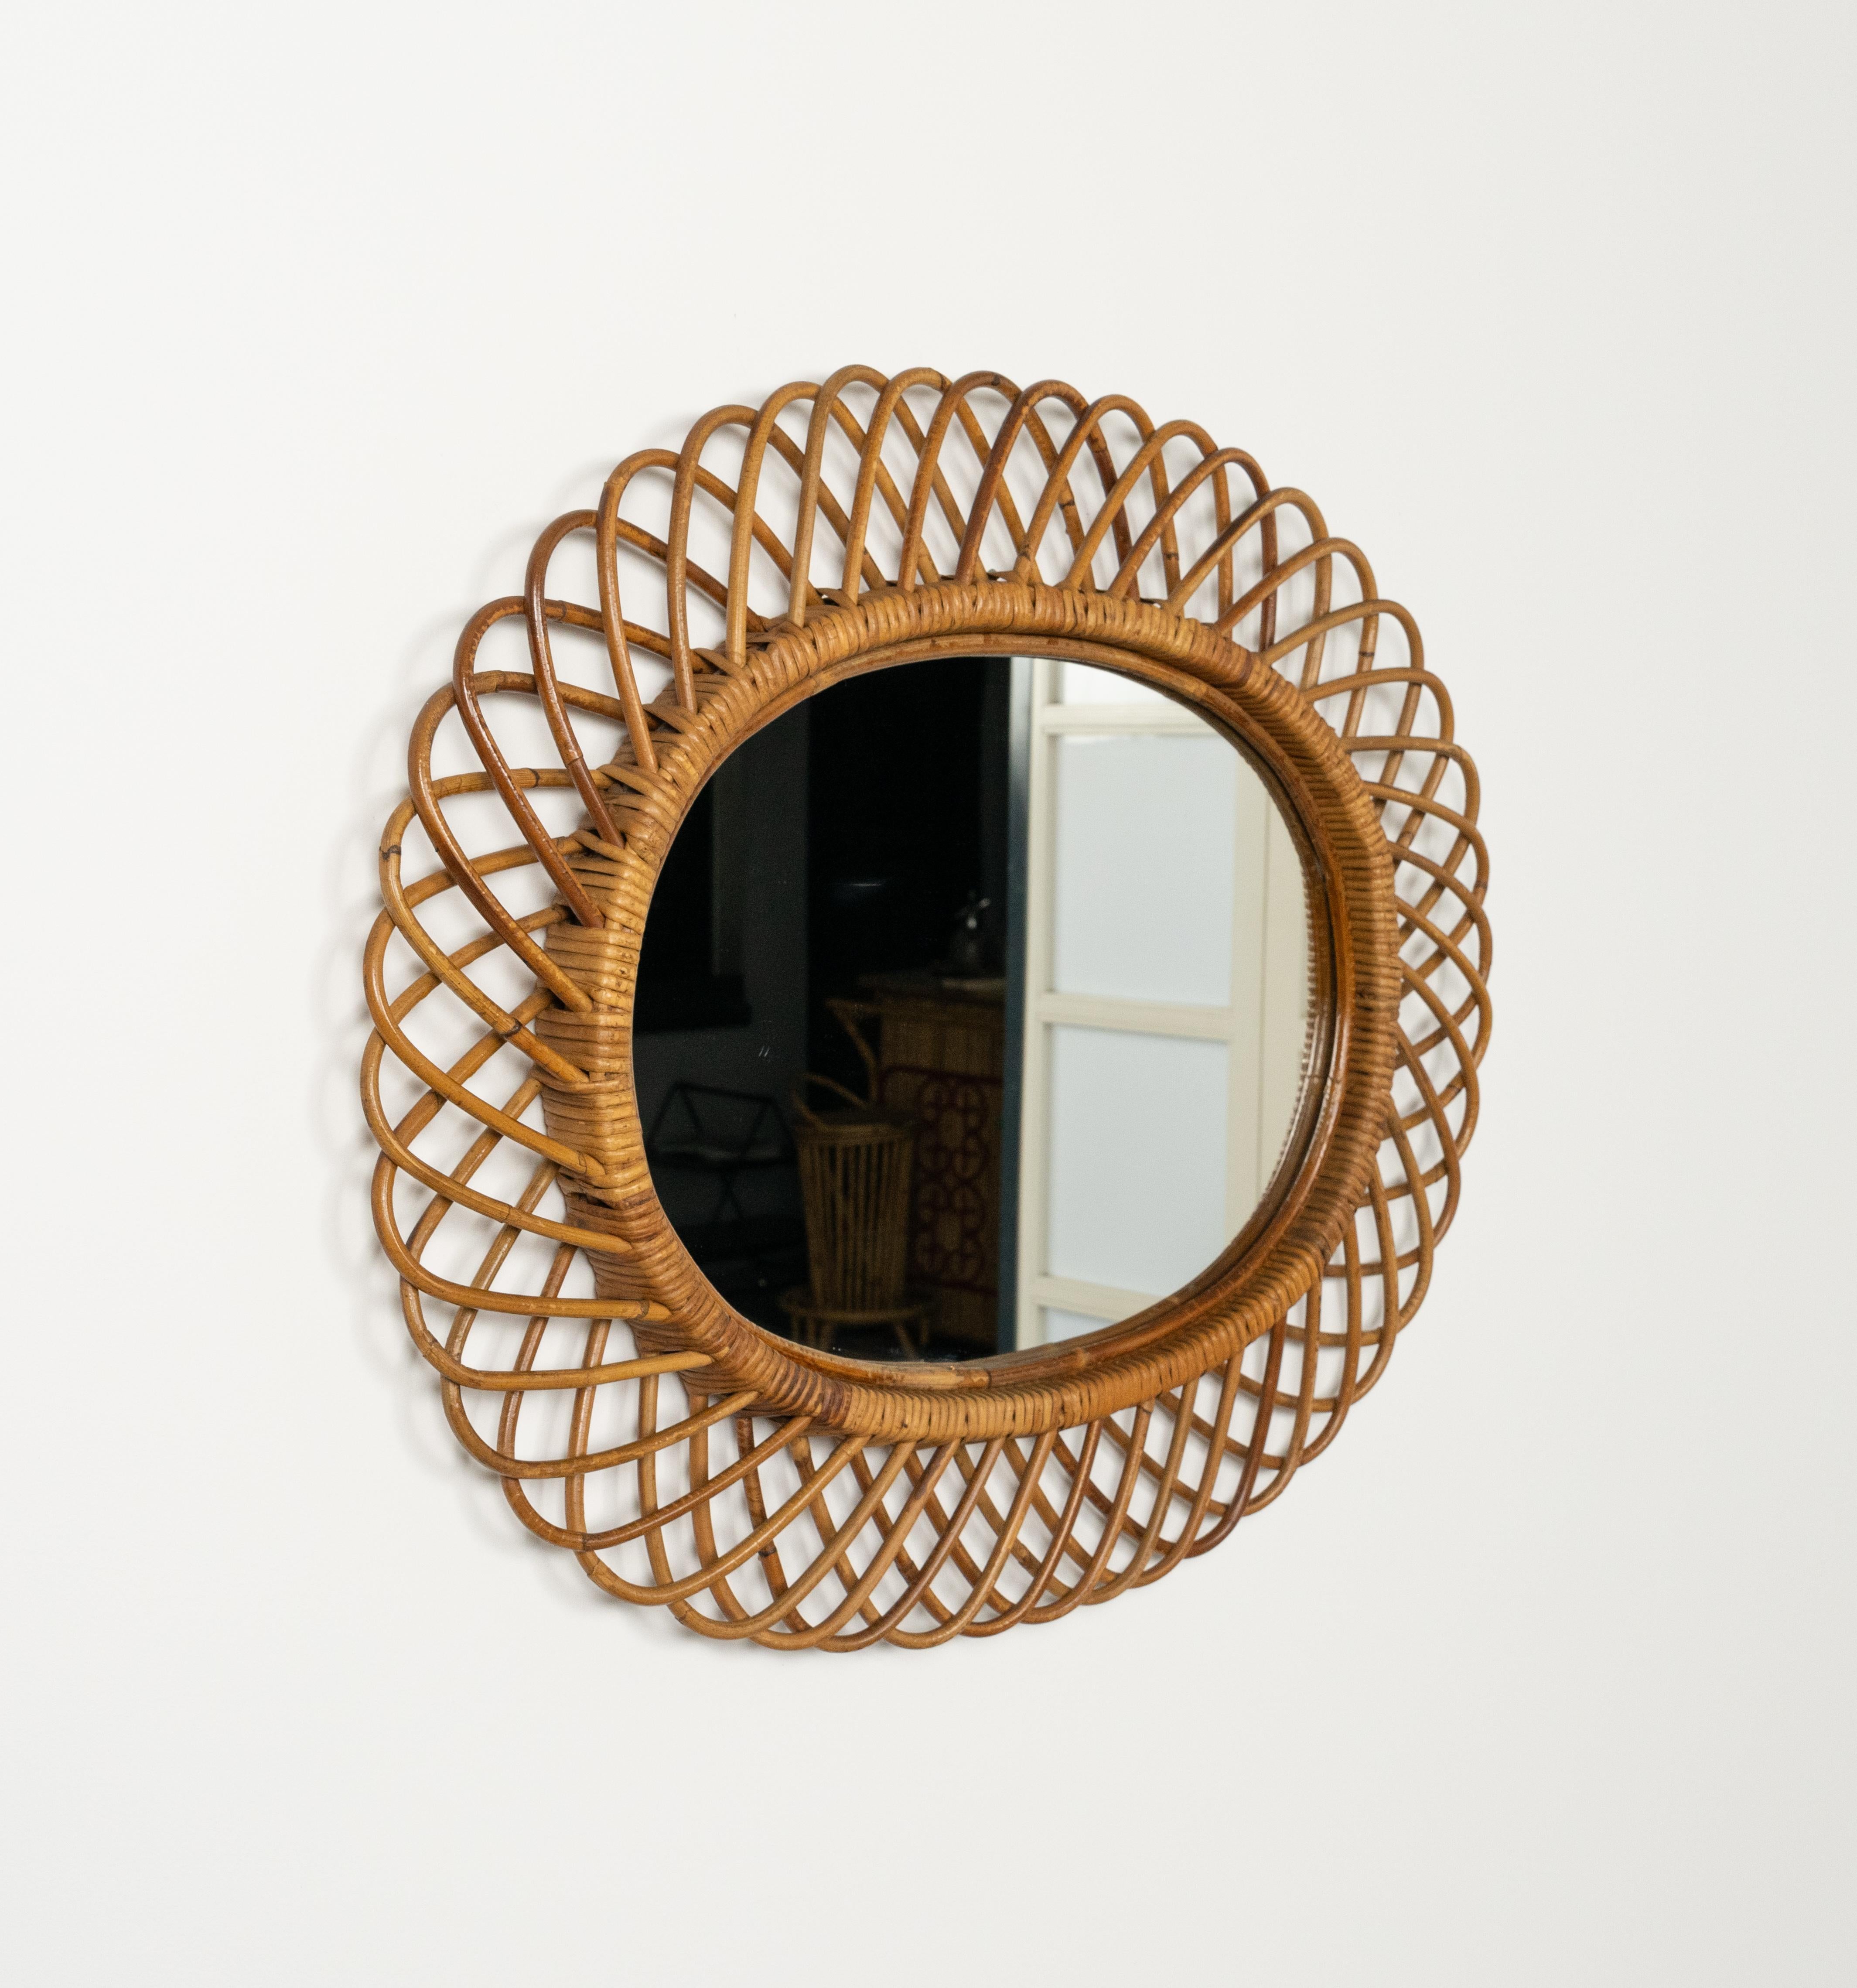 Midcentury Rattan and Bamboo Oval Wall Mirror by Franco Albini, Italy 1960s In Good Condition For Sale In Rome, IT